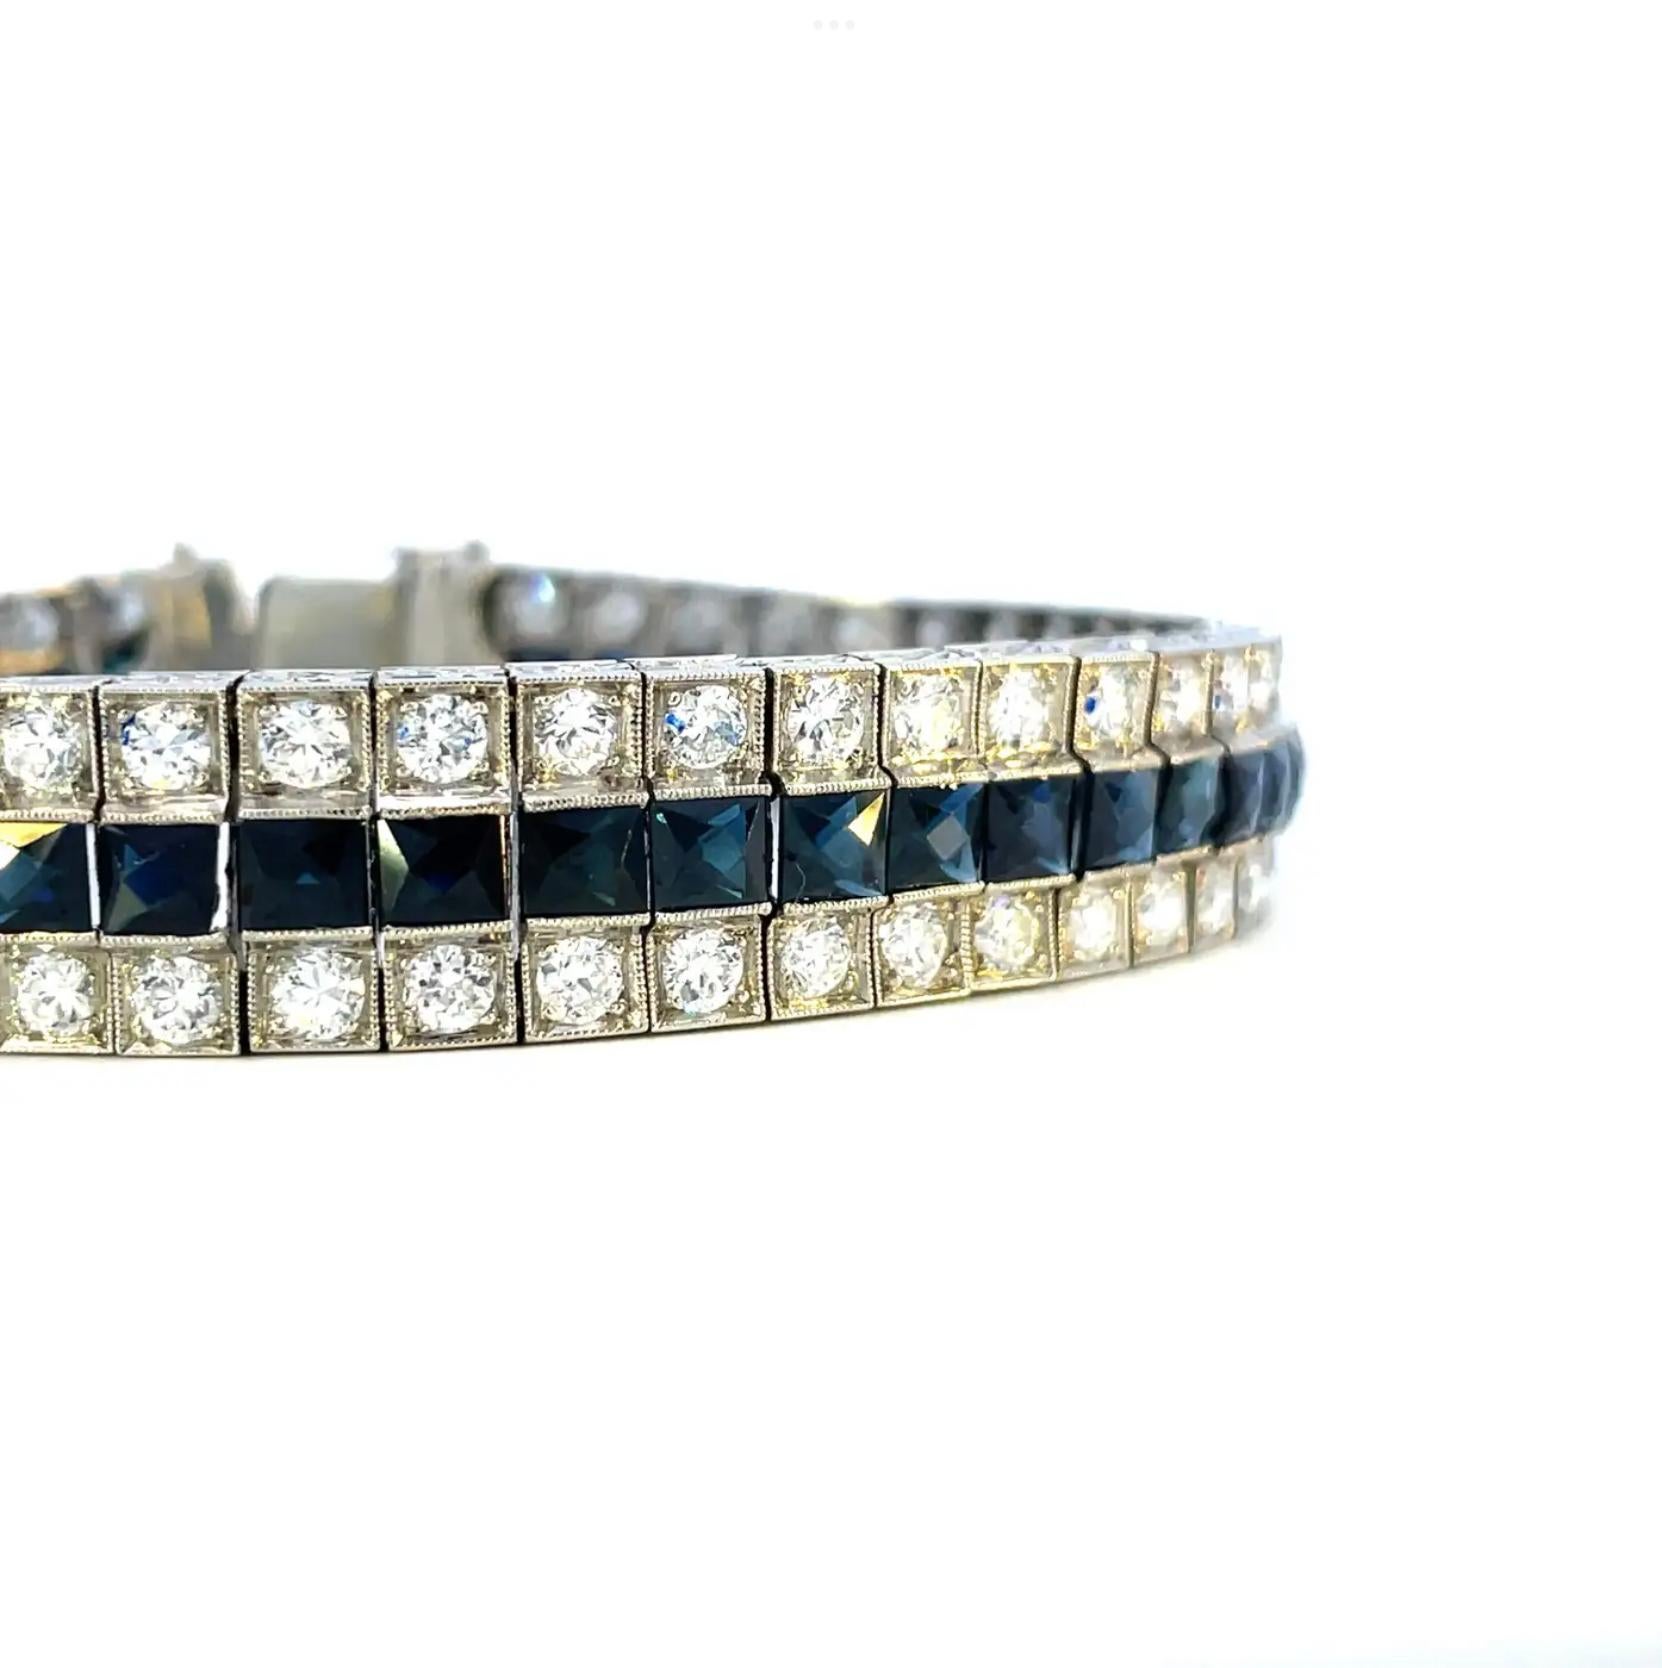 This 1925 Art Deco platinum 3 row diamond bracelet with blue French cut sapphires is a true heirloom from the glitz and glamour of the Roaring Twenties. This stunning bracelet is marked by opulence and elegance; 7.5